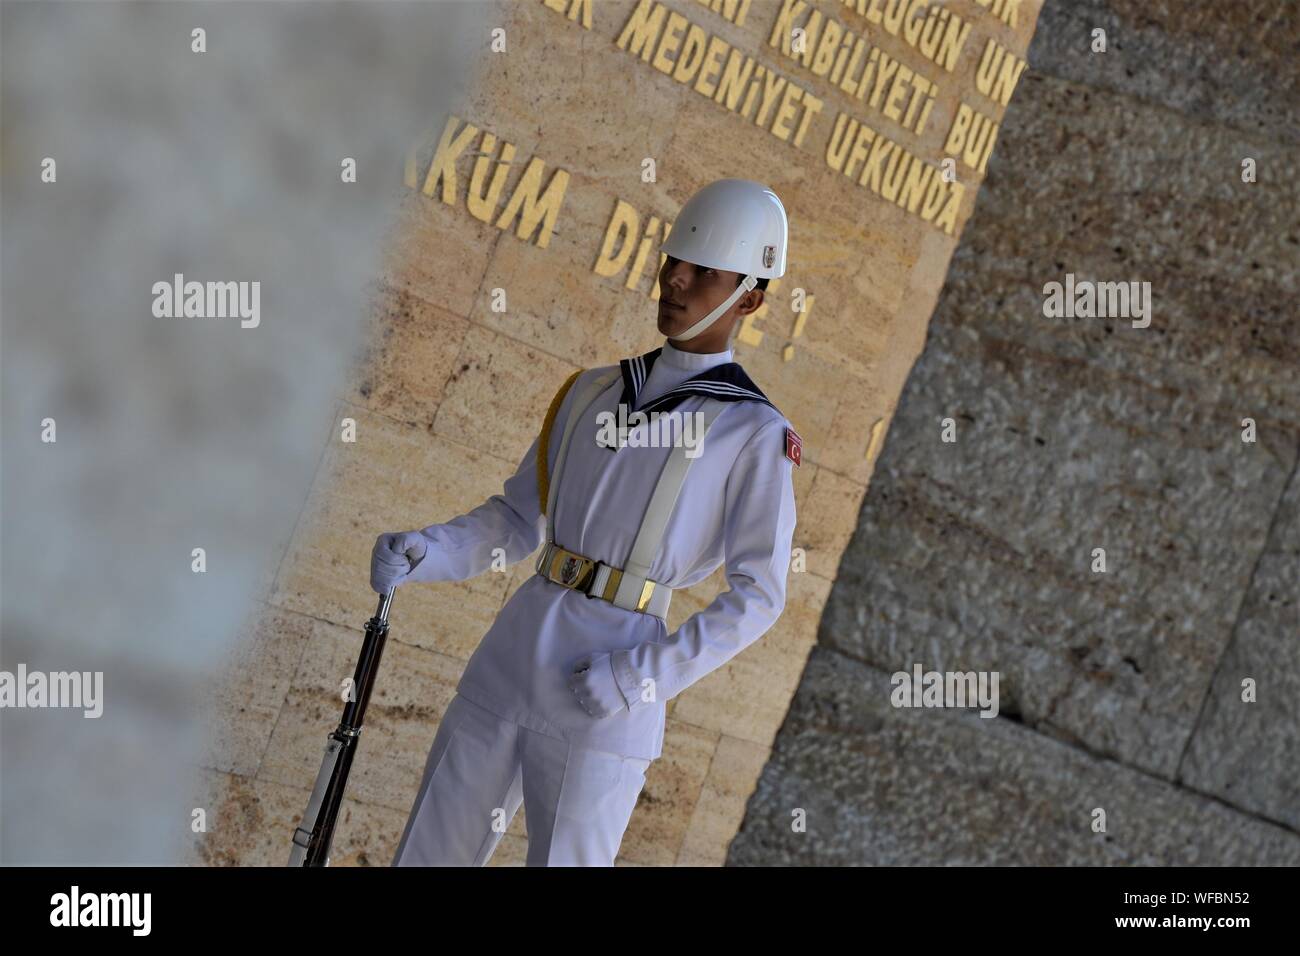 Ankara, Turkey. 31st Aug, 2019. A Turkish soldier stands guard at Anitkabir, the mausoleum of modern Turkey's founder Mustafa Kemal Ataturk, a day after the 97th anniversary of Victory Day, which commemorates the defeat of the Greek forces at the hands of the Turks in the Battle of Dumlupinar in 1922. Credit: Altan Gocher/ZUMA Wire/Alamy Live News Stock Photo